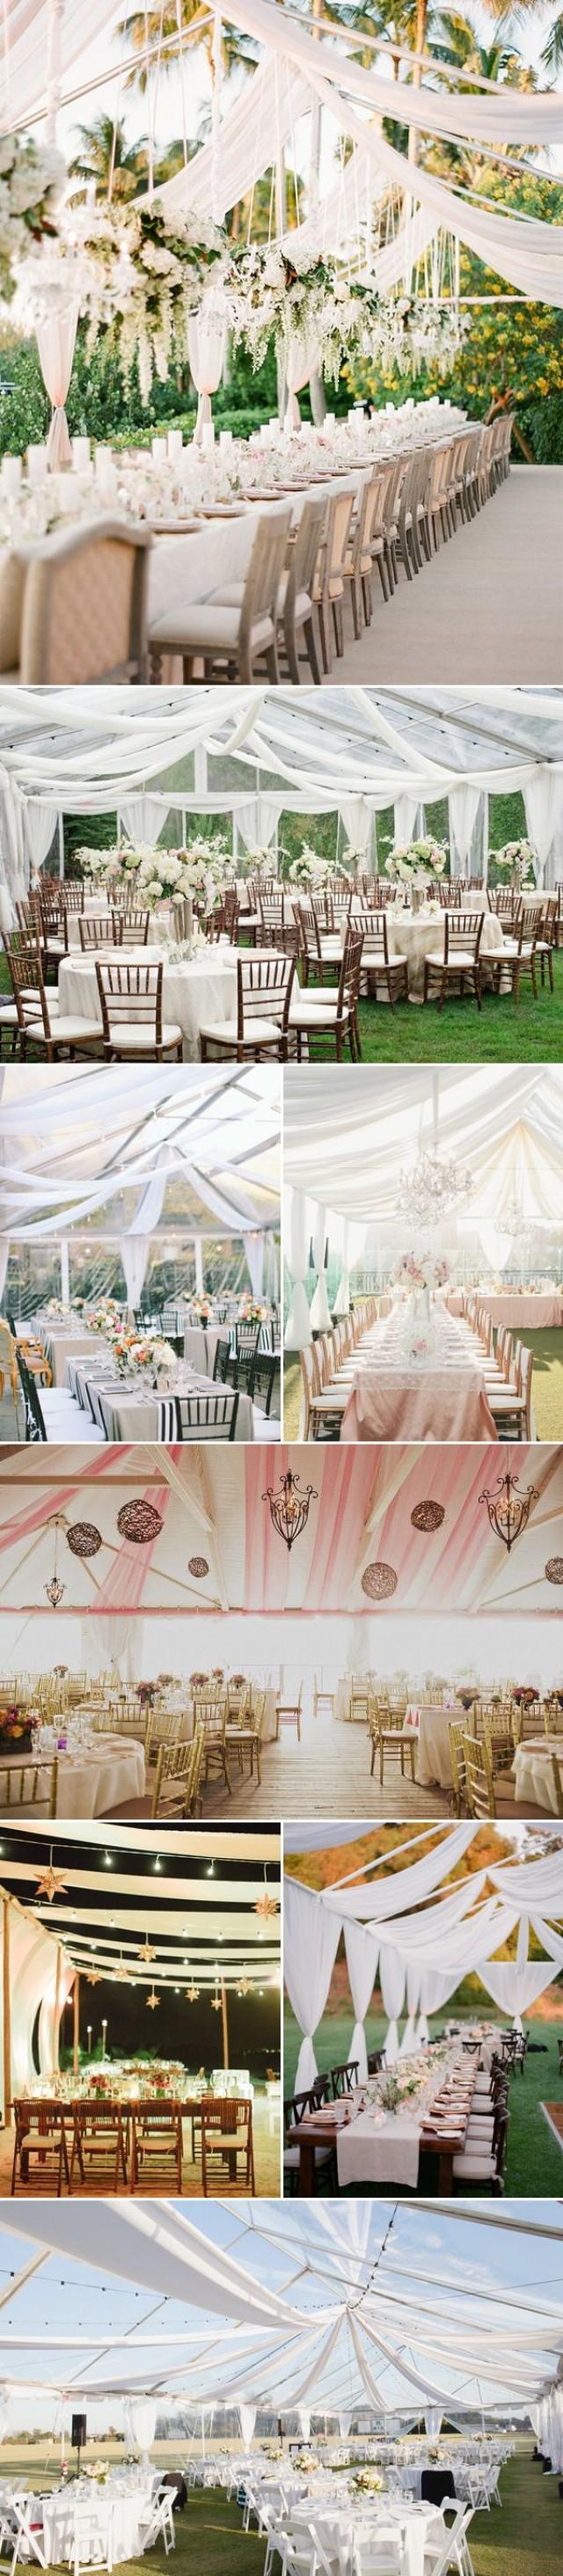 40 Beautiful Ways To Decorate Your Wedding Tent